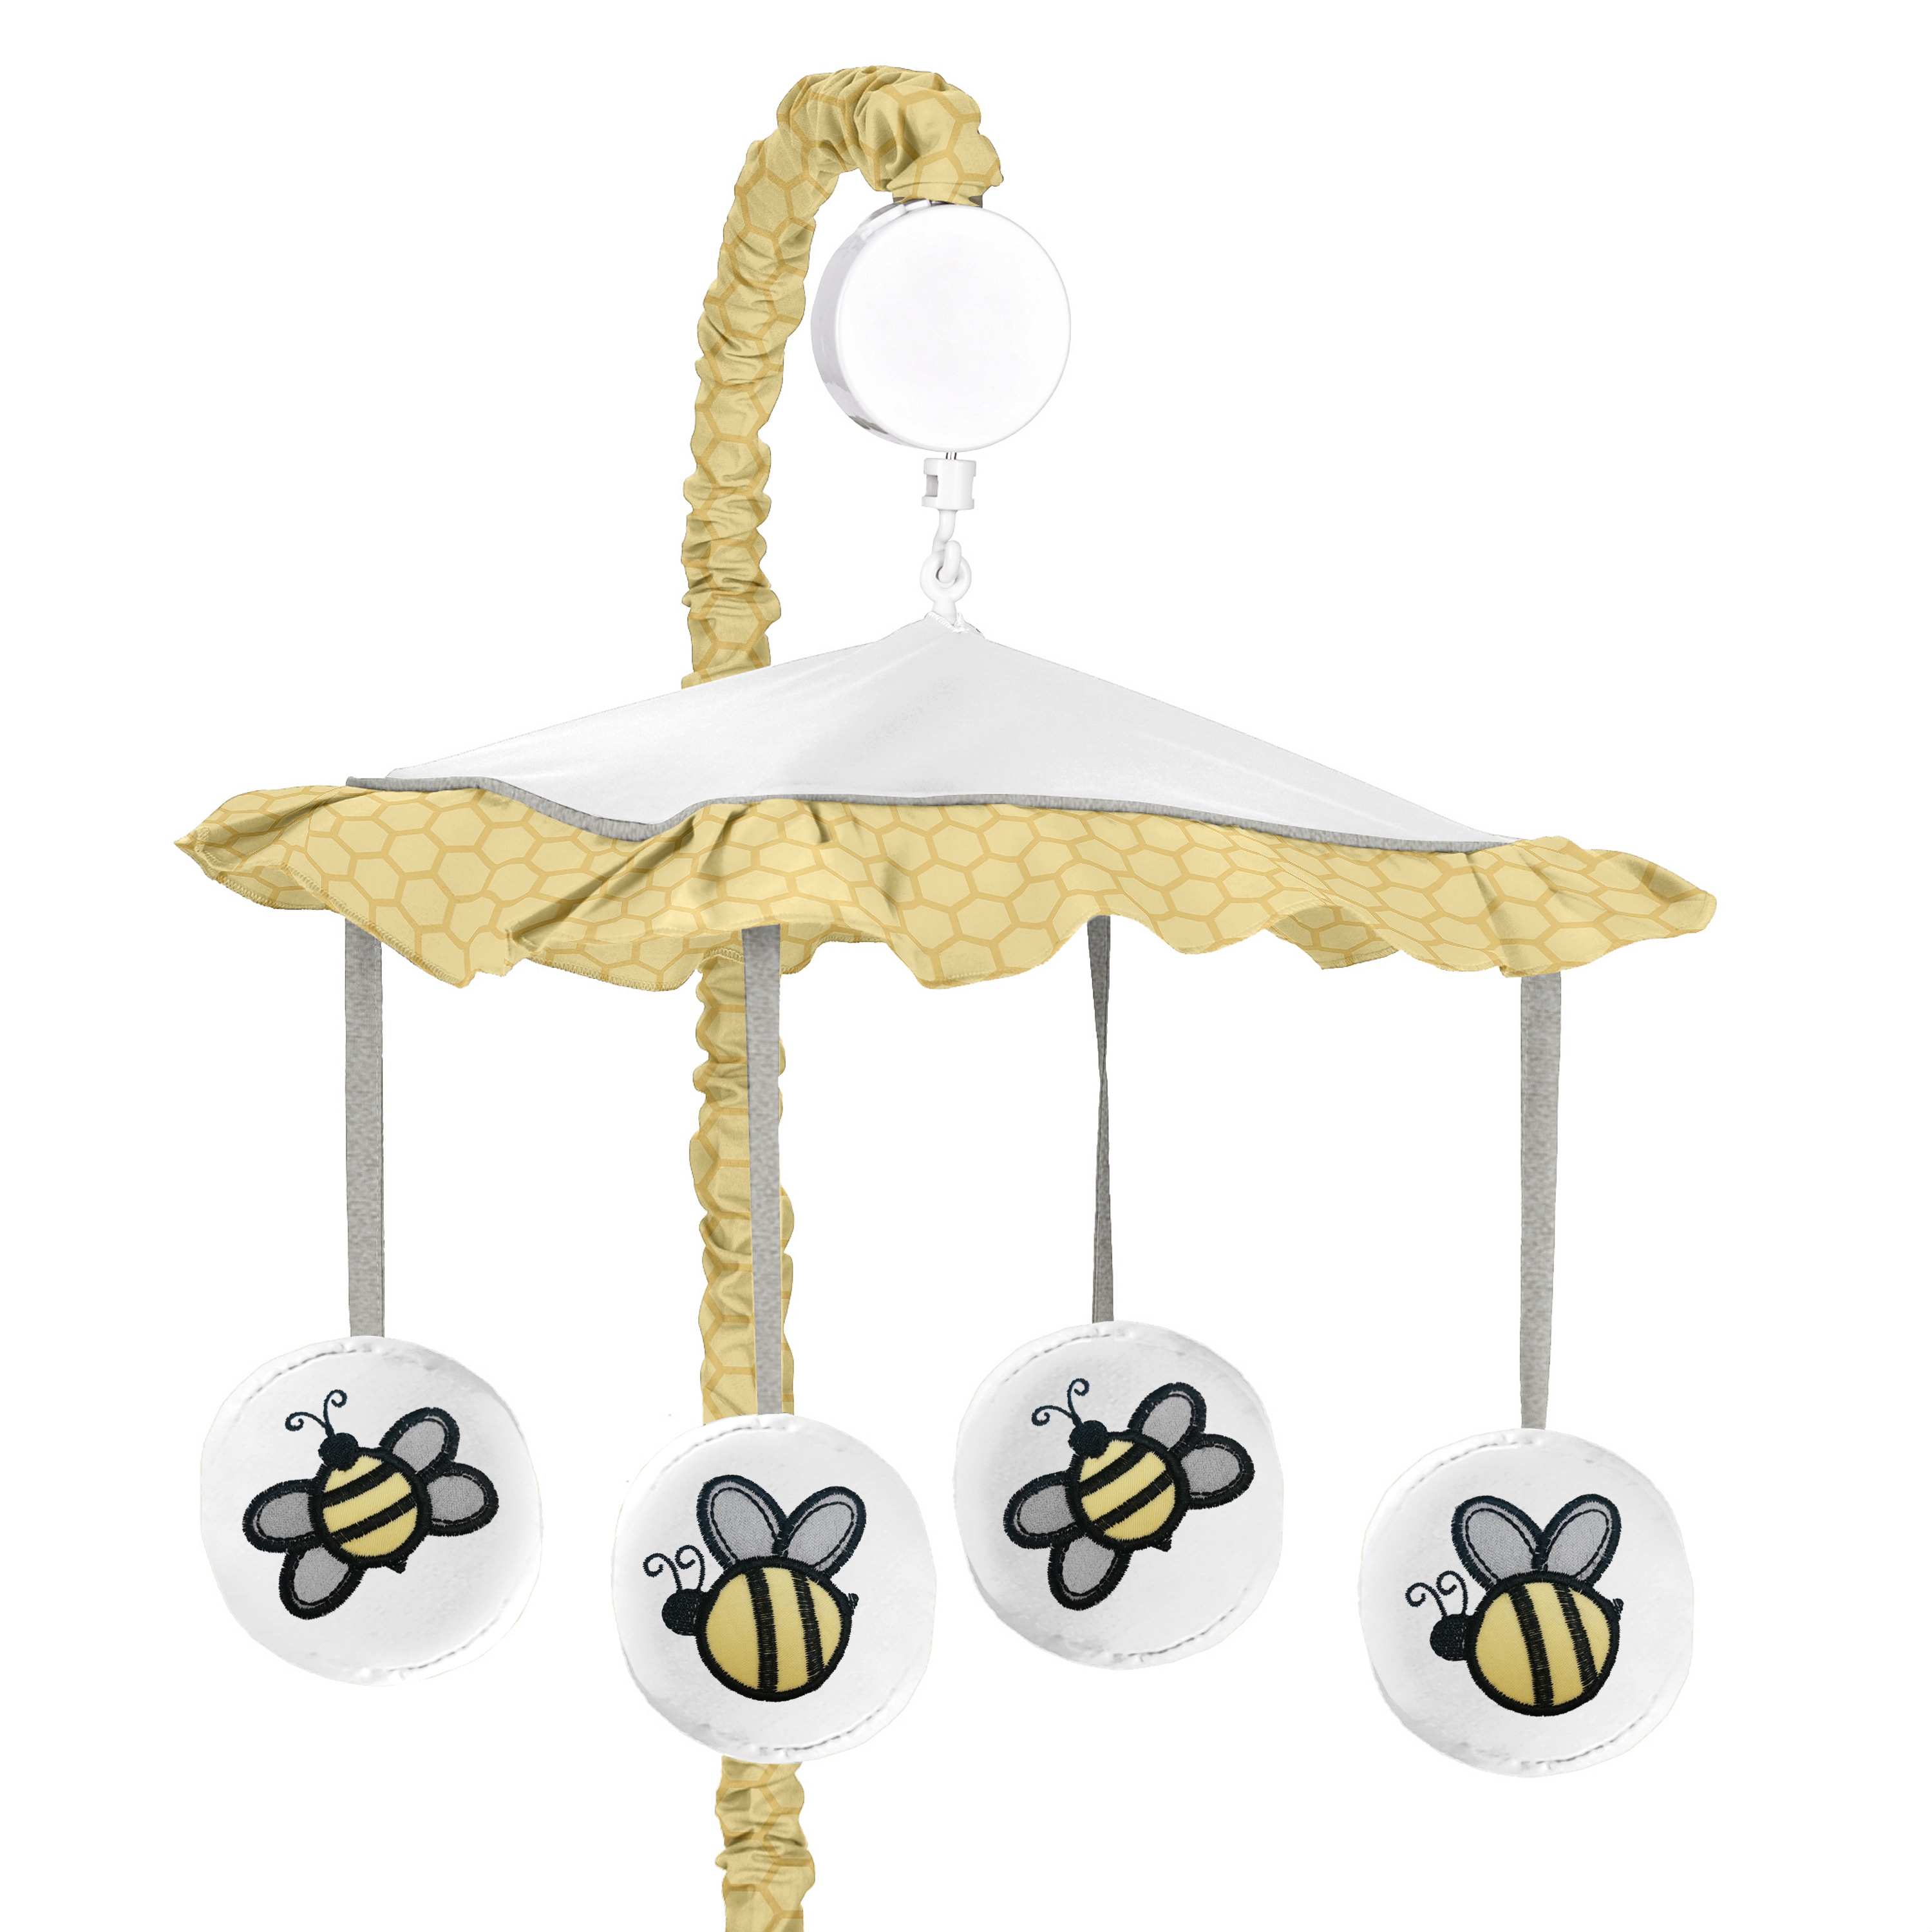 bumble bee baby mobile